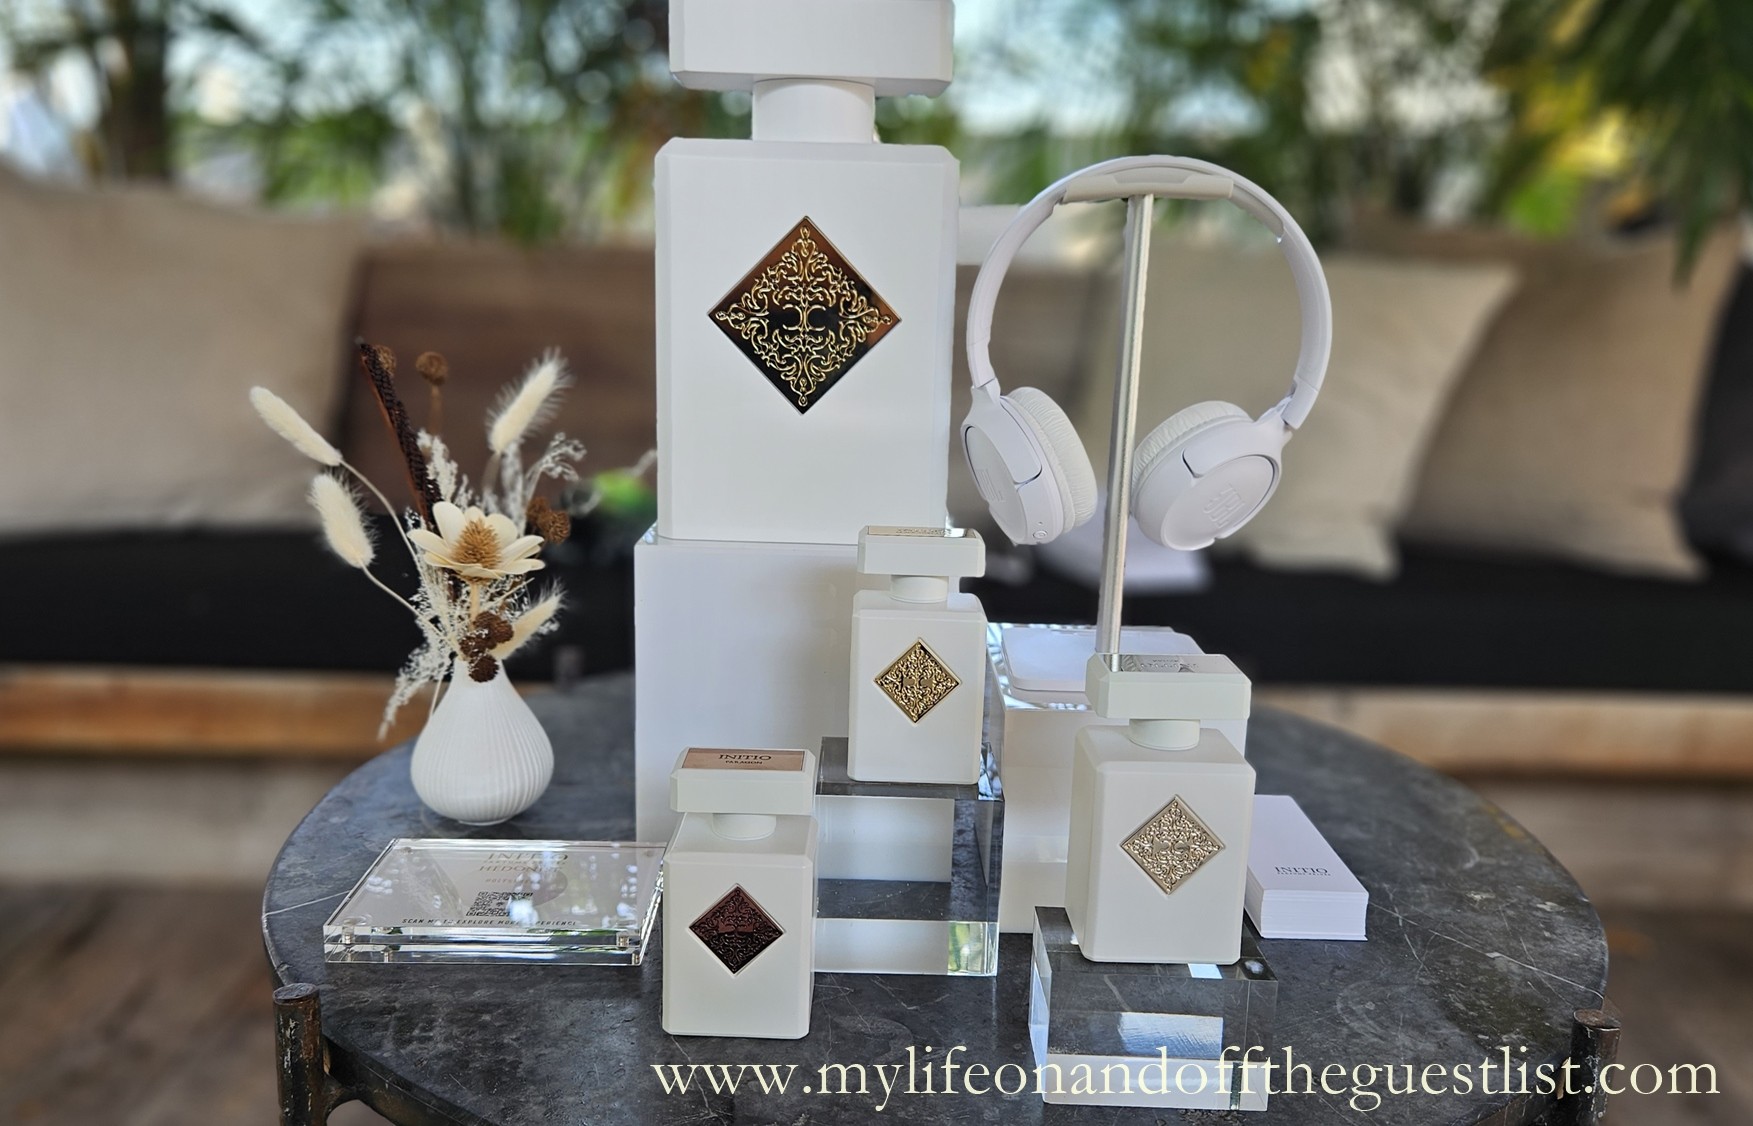 Initio Parfums Privés' The Holy Sphere Immersion Experience